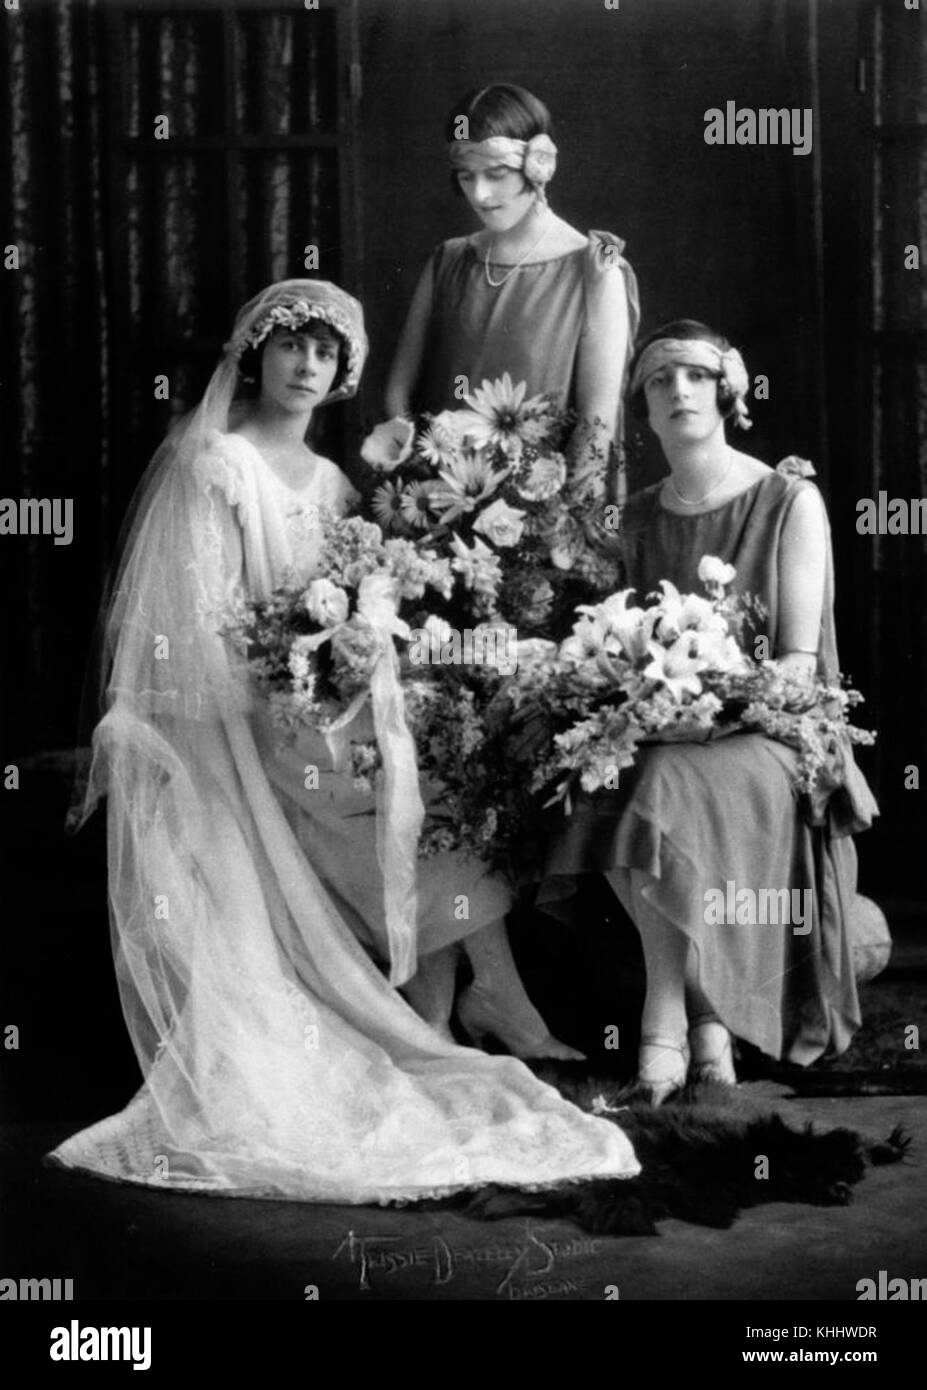 1 146535 Agnes, Nea and Glad pose for wedding photographs, October 1925 Stock Photo